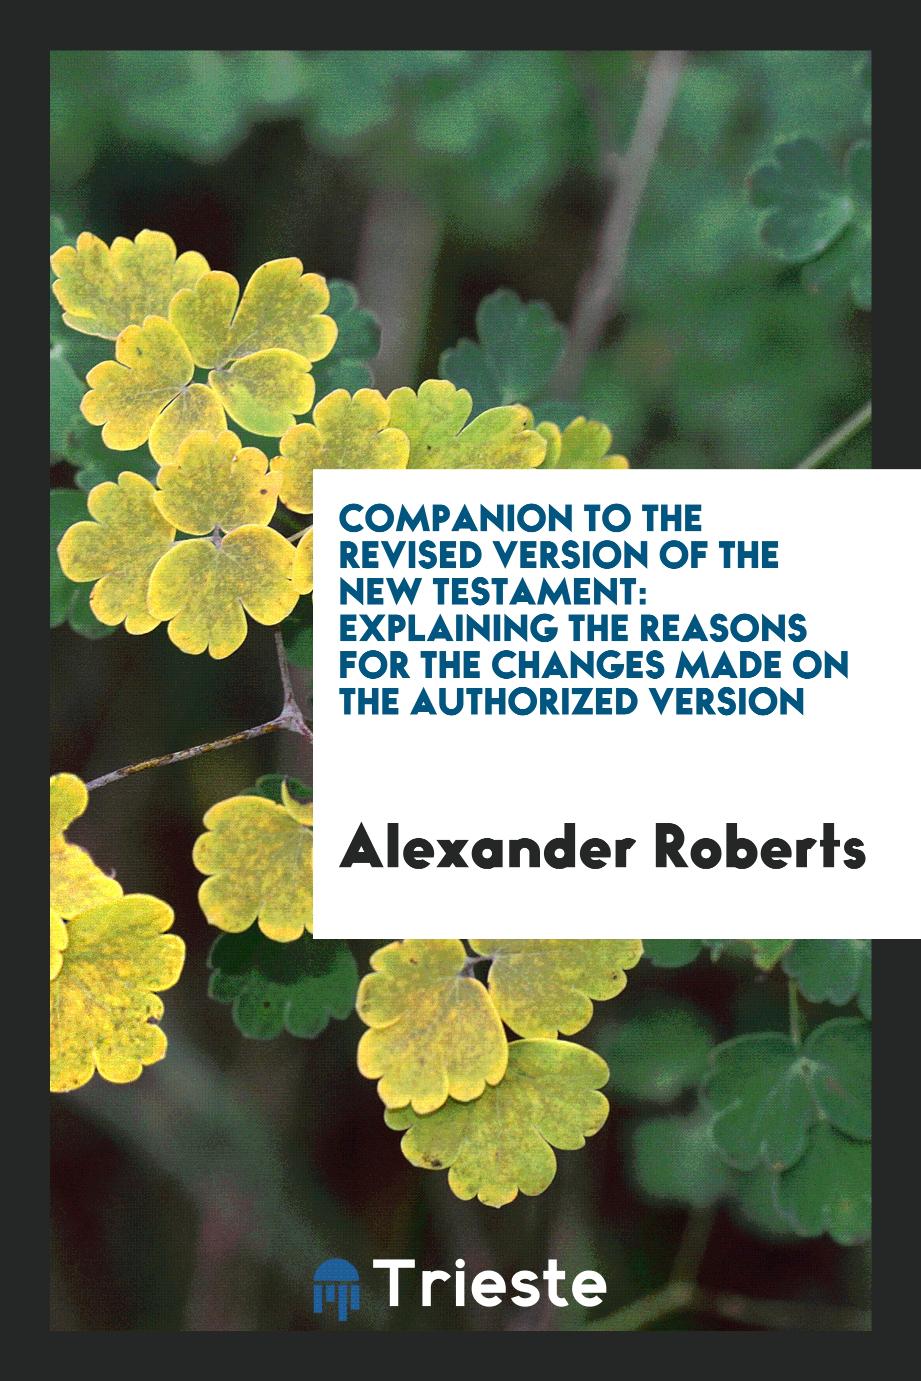 Companion to the Revised version of the New Testament: explaining the reasons for the changes made on the Authorized version